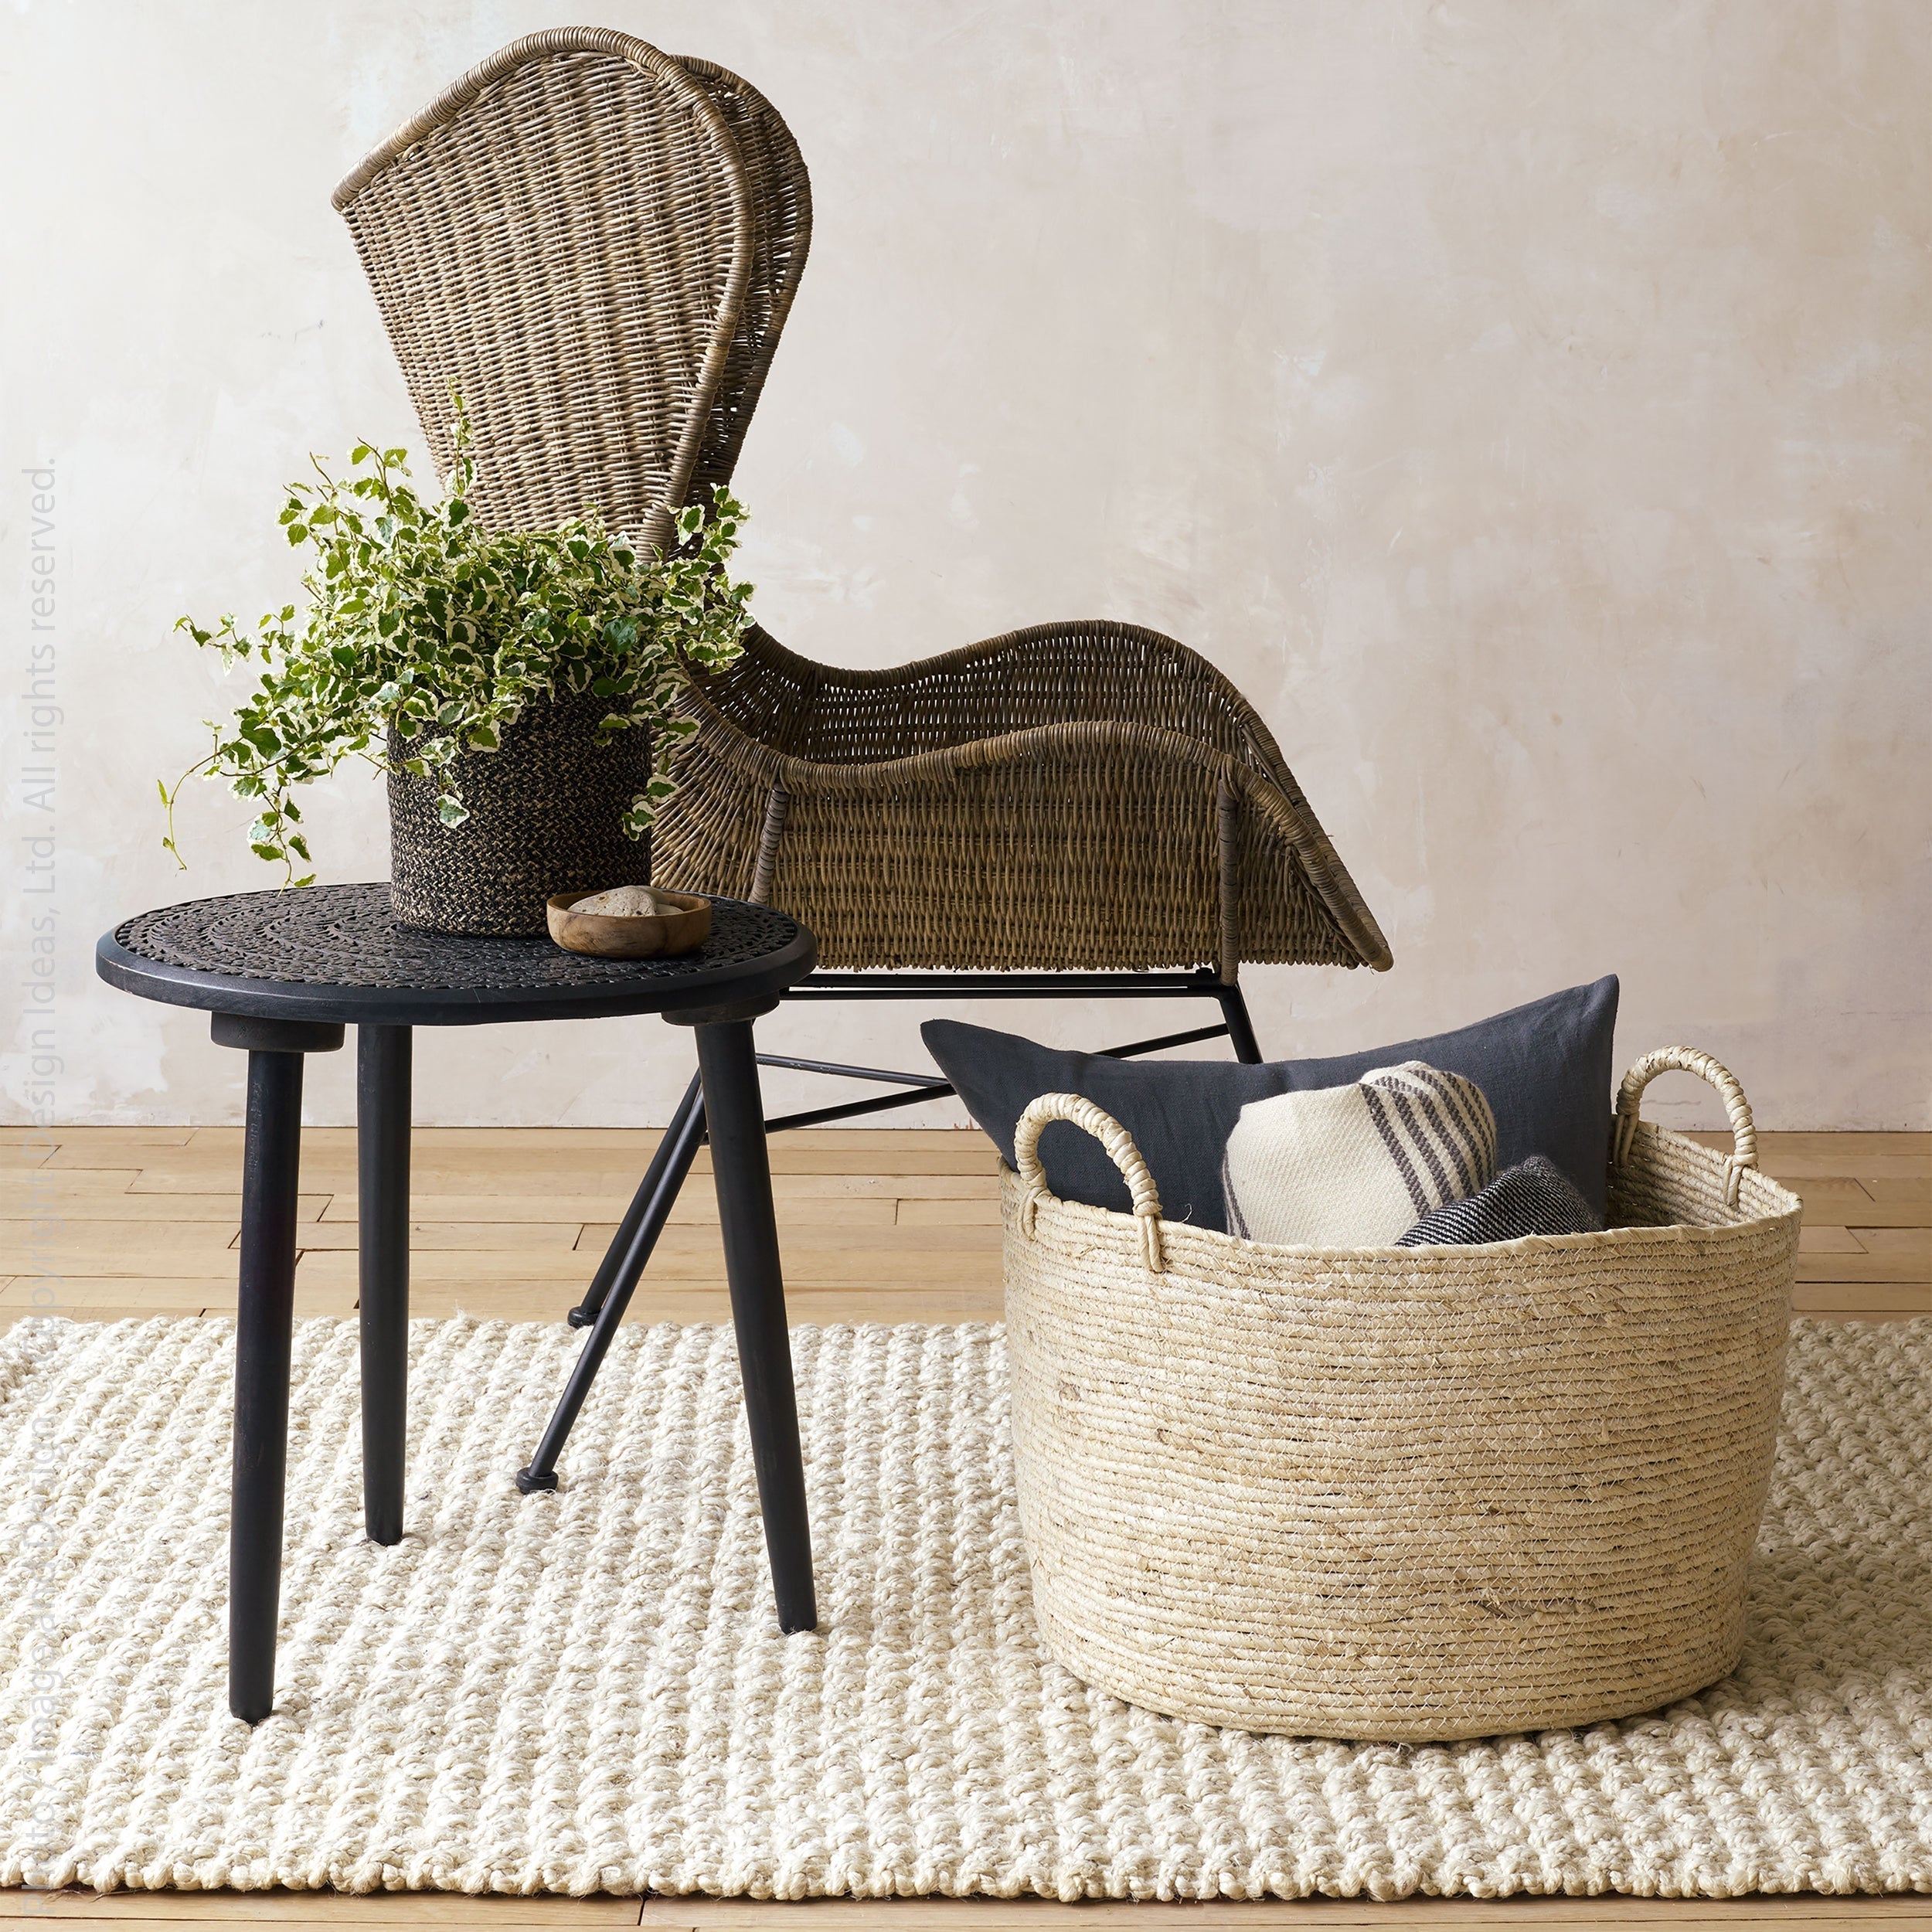 Maiz™ throw basket - Natural | Image 3 | Premium Basket from the Maiz collection | made with Corn husk for long lasting use | sustainably sourced with recycled materials | texxture